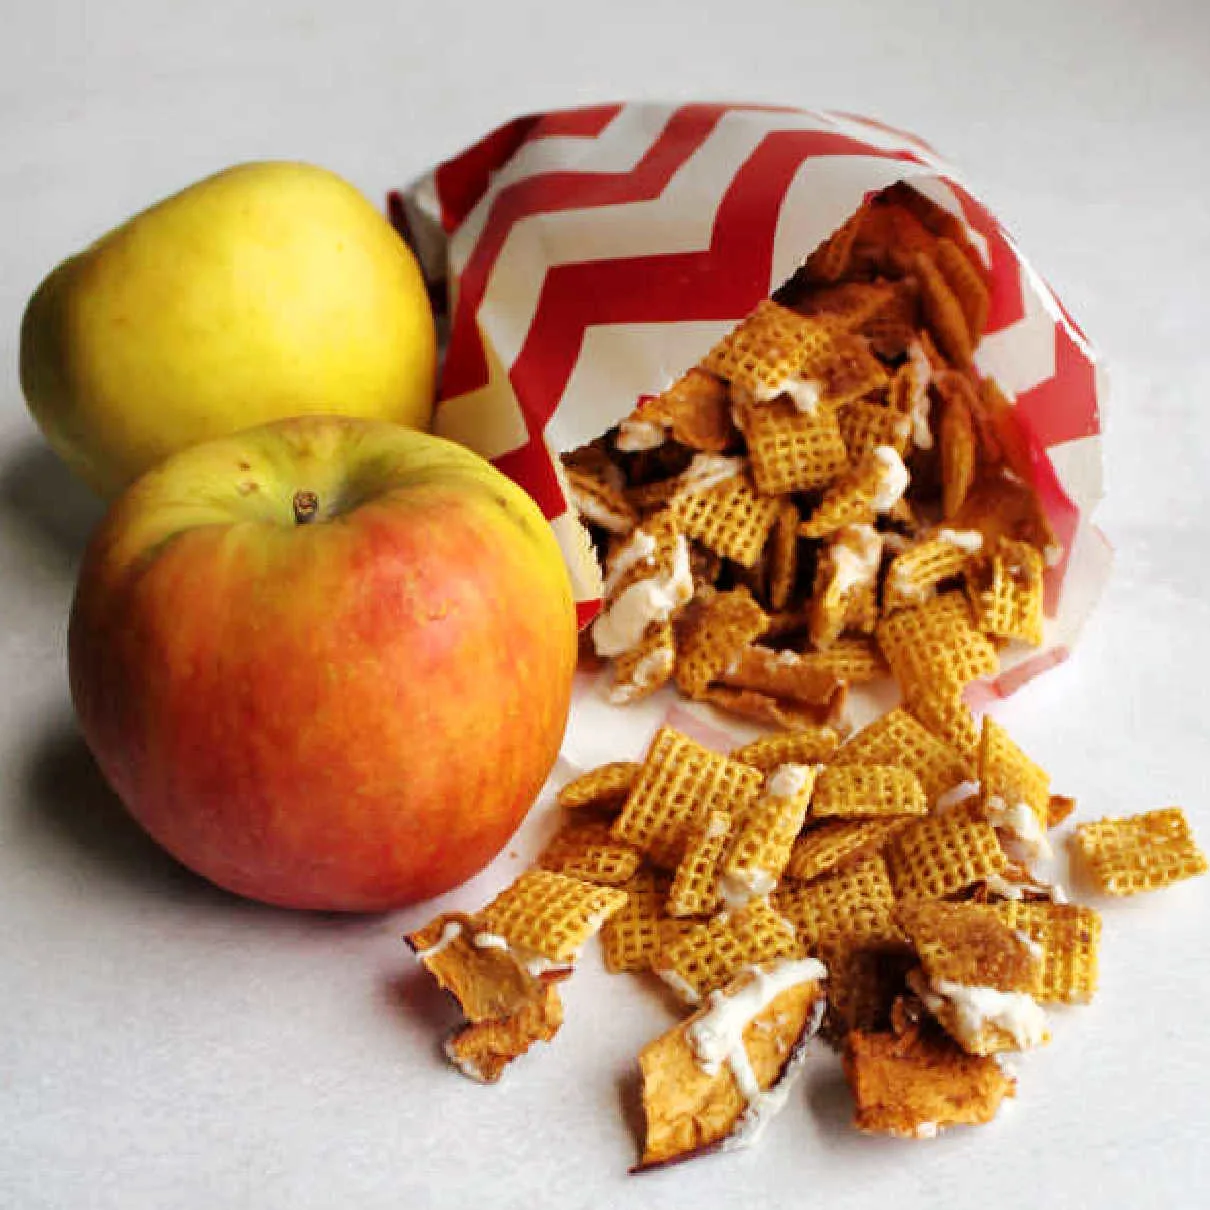 Two apples next to bag of apple cinnamon chex mix with chunks of dried apples and white chocolate drizzle.